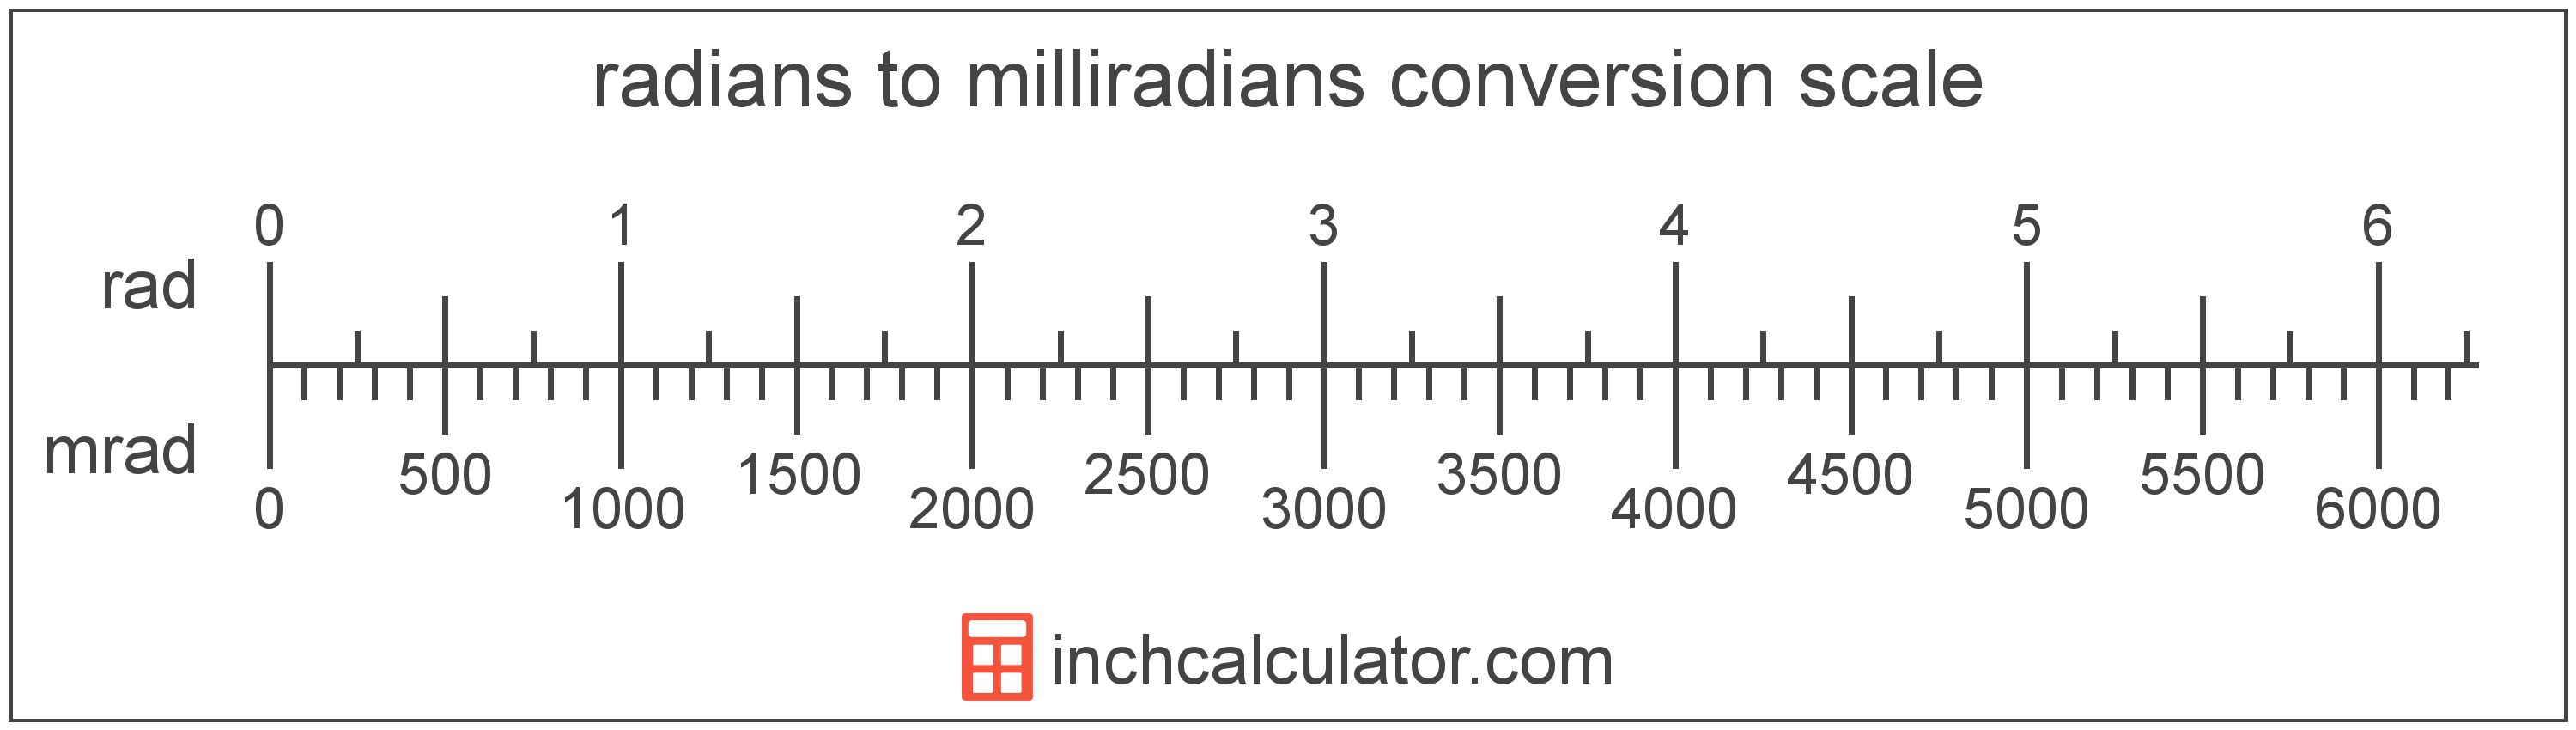 conversion scale showing milliradians and equivalent radians angle values